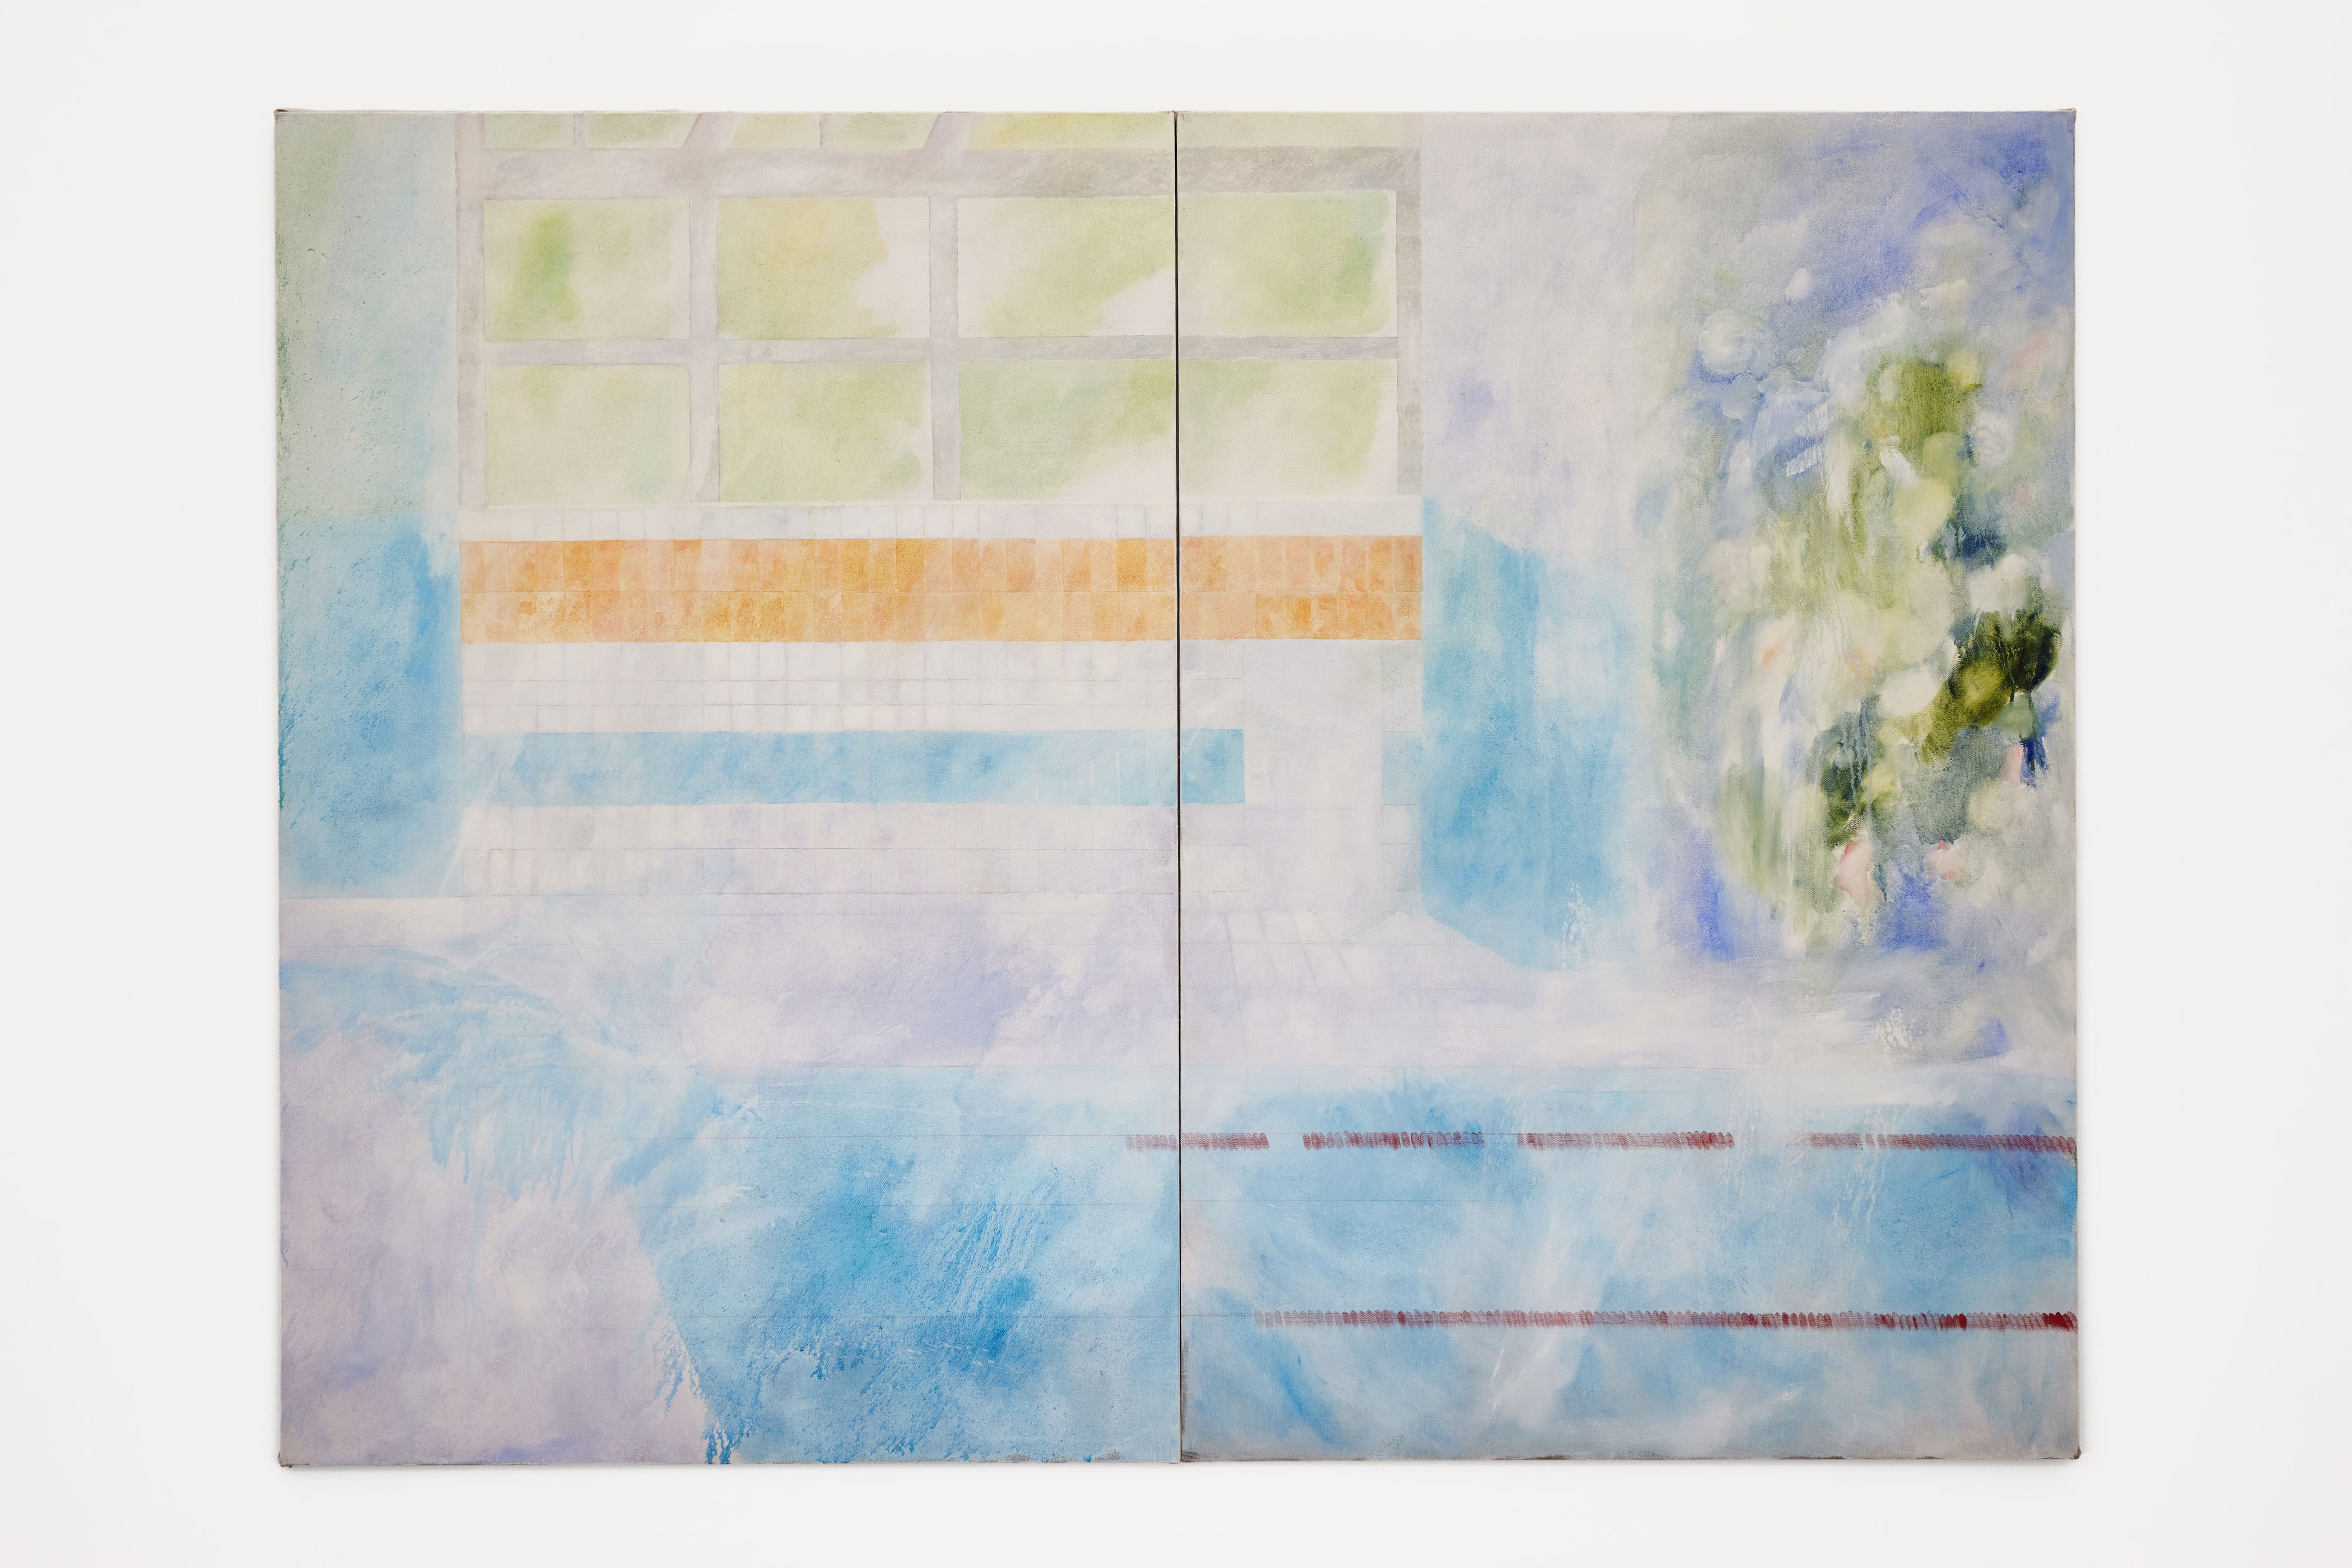 Nino Kapanadze, I can connect nothing with nothing (Piscine municipale), 2024, Oil on linen, 2 panels — 195 × 130 cm (each). Courtesy of the artist and Crèvecœur, Paris. Photo: Alex Kostromin.